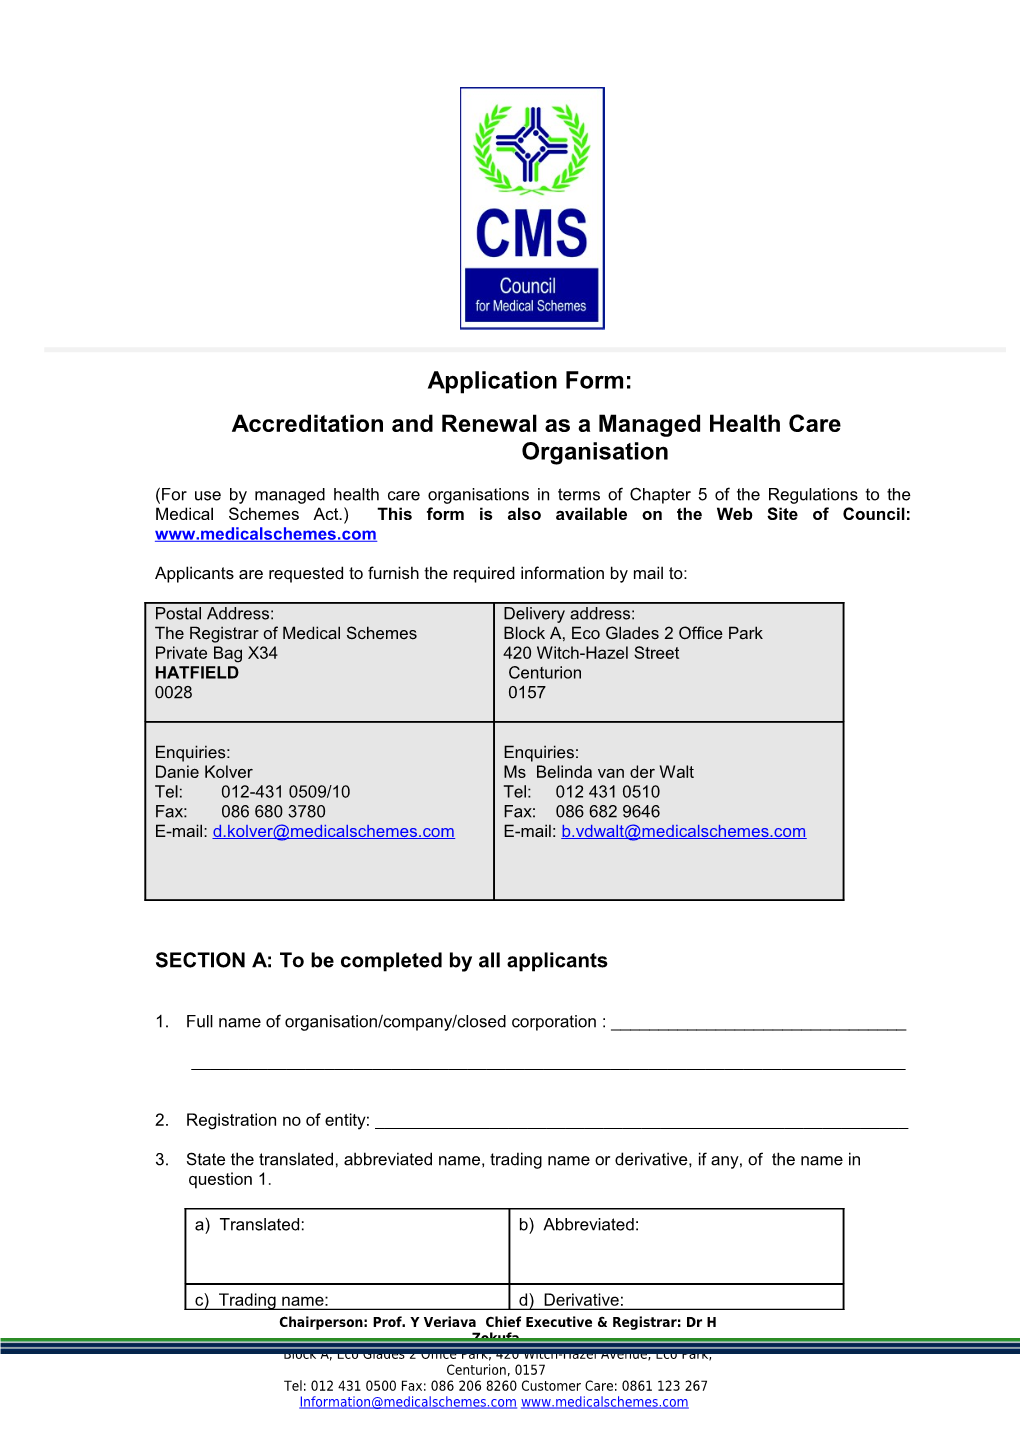 Accreditation and Renewal As a Managed Health Care Organisation